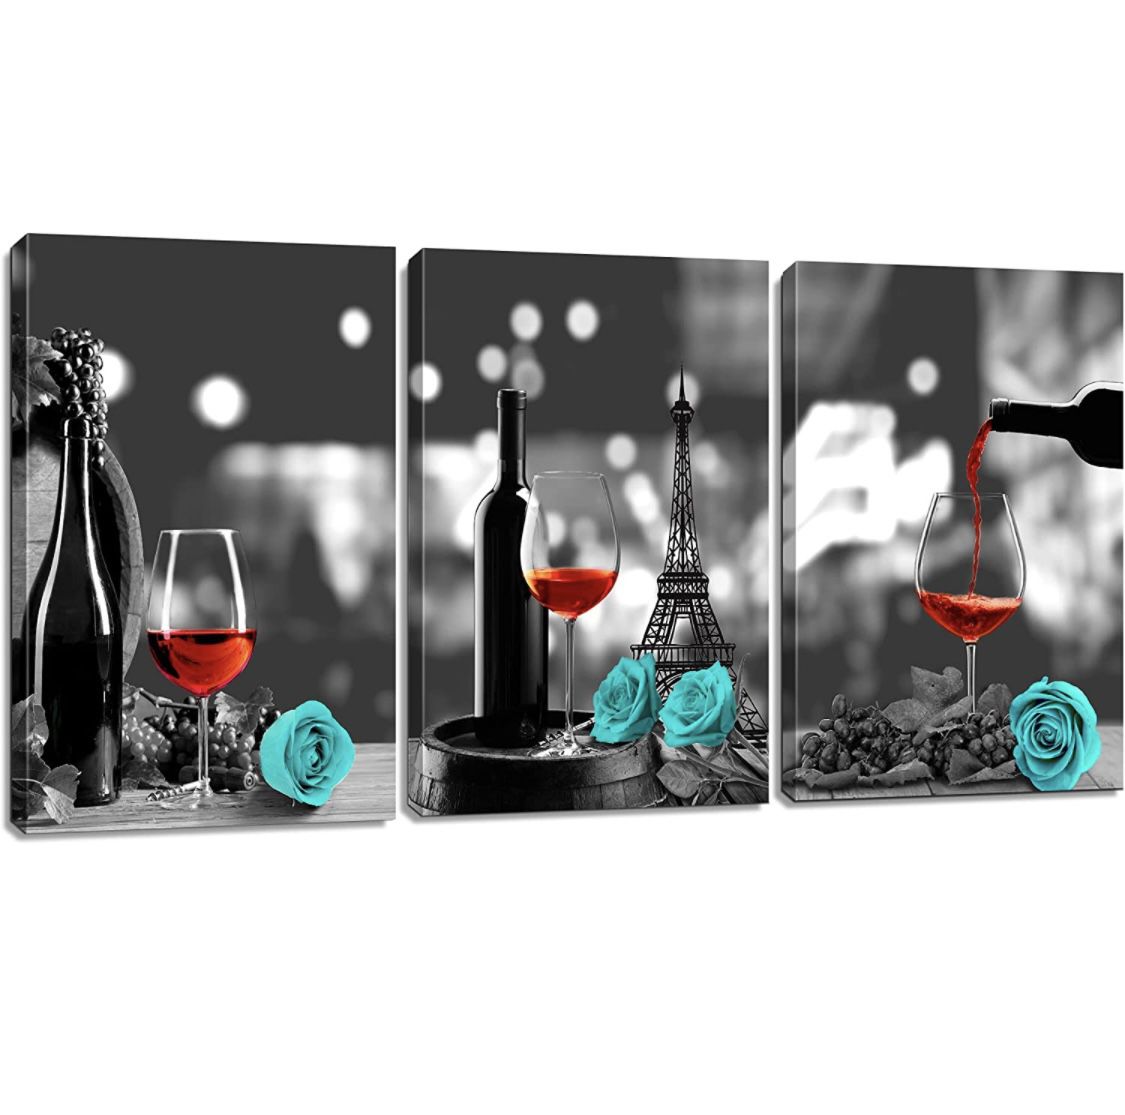 Kitchen Wall Decor Canvas Wall Art Red Wine Teal Rose Artwork for Home Walls Black and White Painting Giclee Printed Dining Room Decor Turquoise Pine 